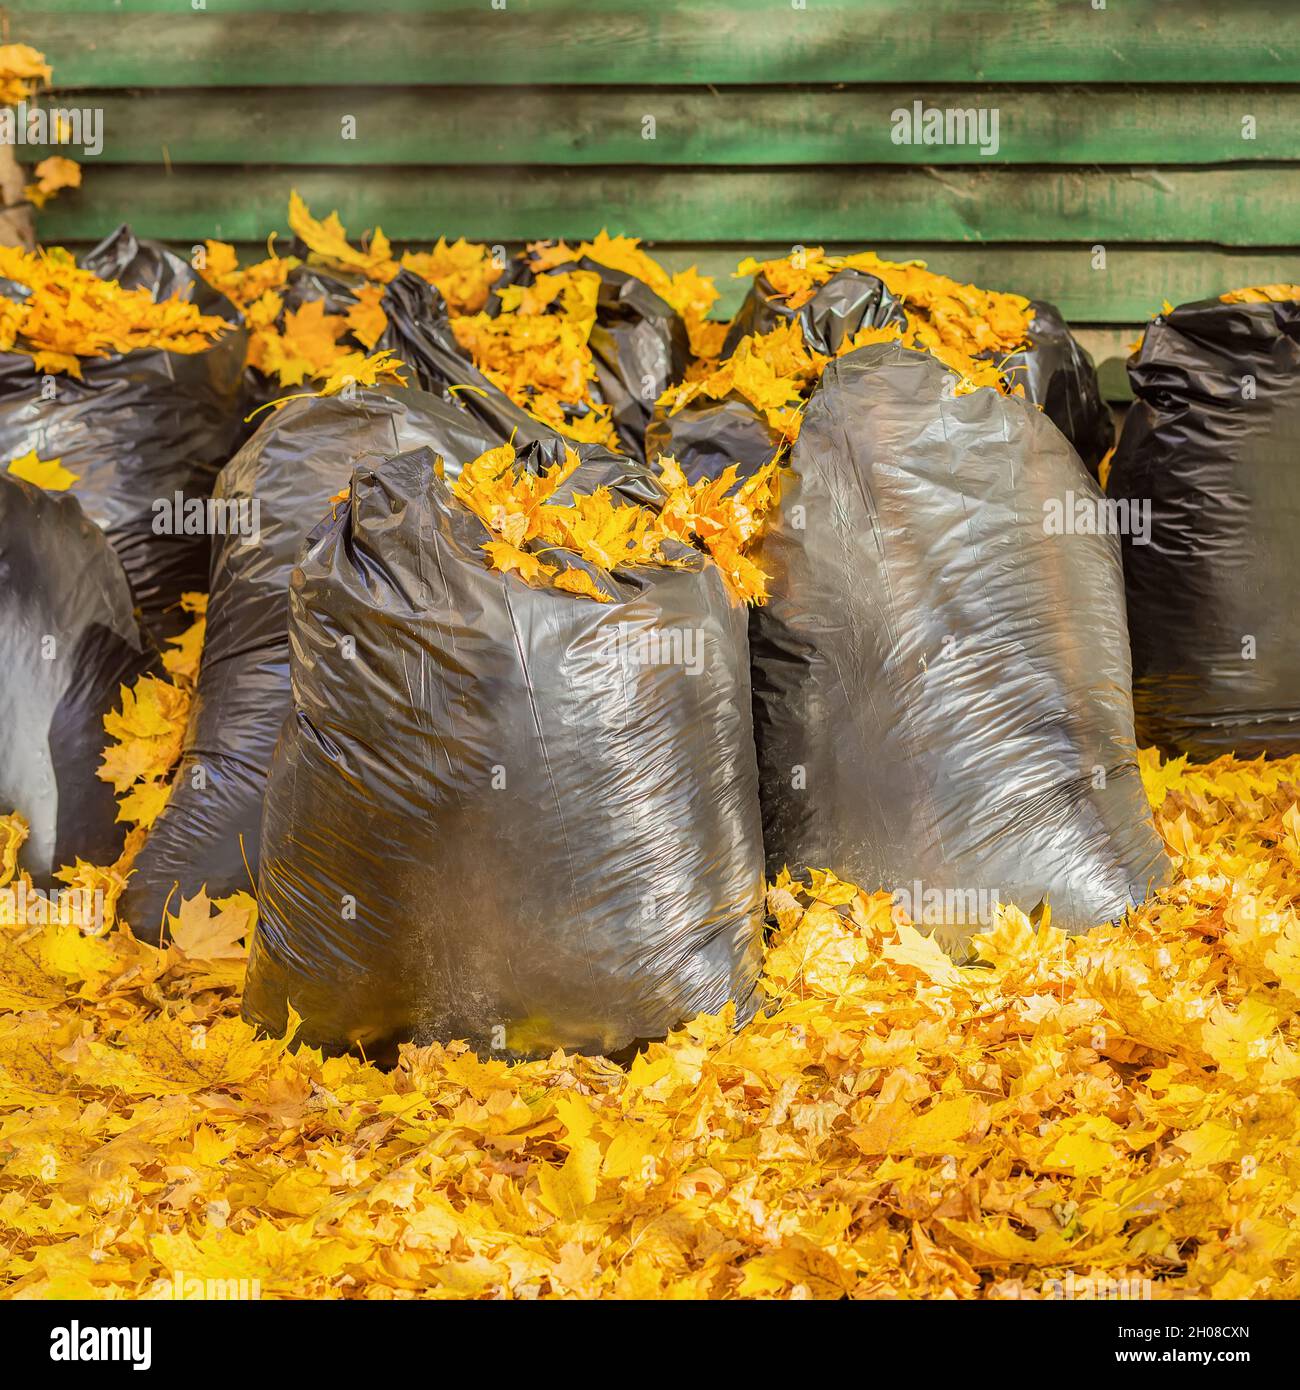 https://c8.alamy.com/comp/2H08CXN/large-plastic-bags-with-collected-autumn-leaves-street-cleaning-in-leaf-fall-seasonal-work-2H08CXN.jpg